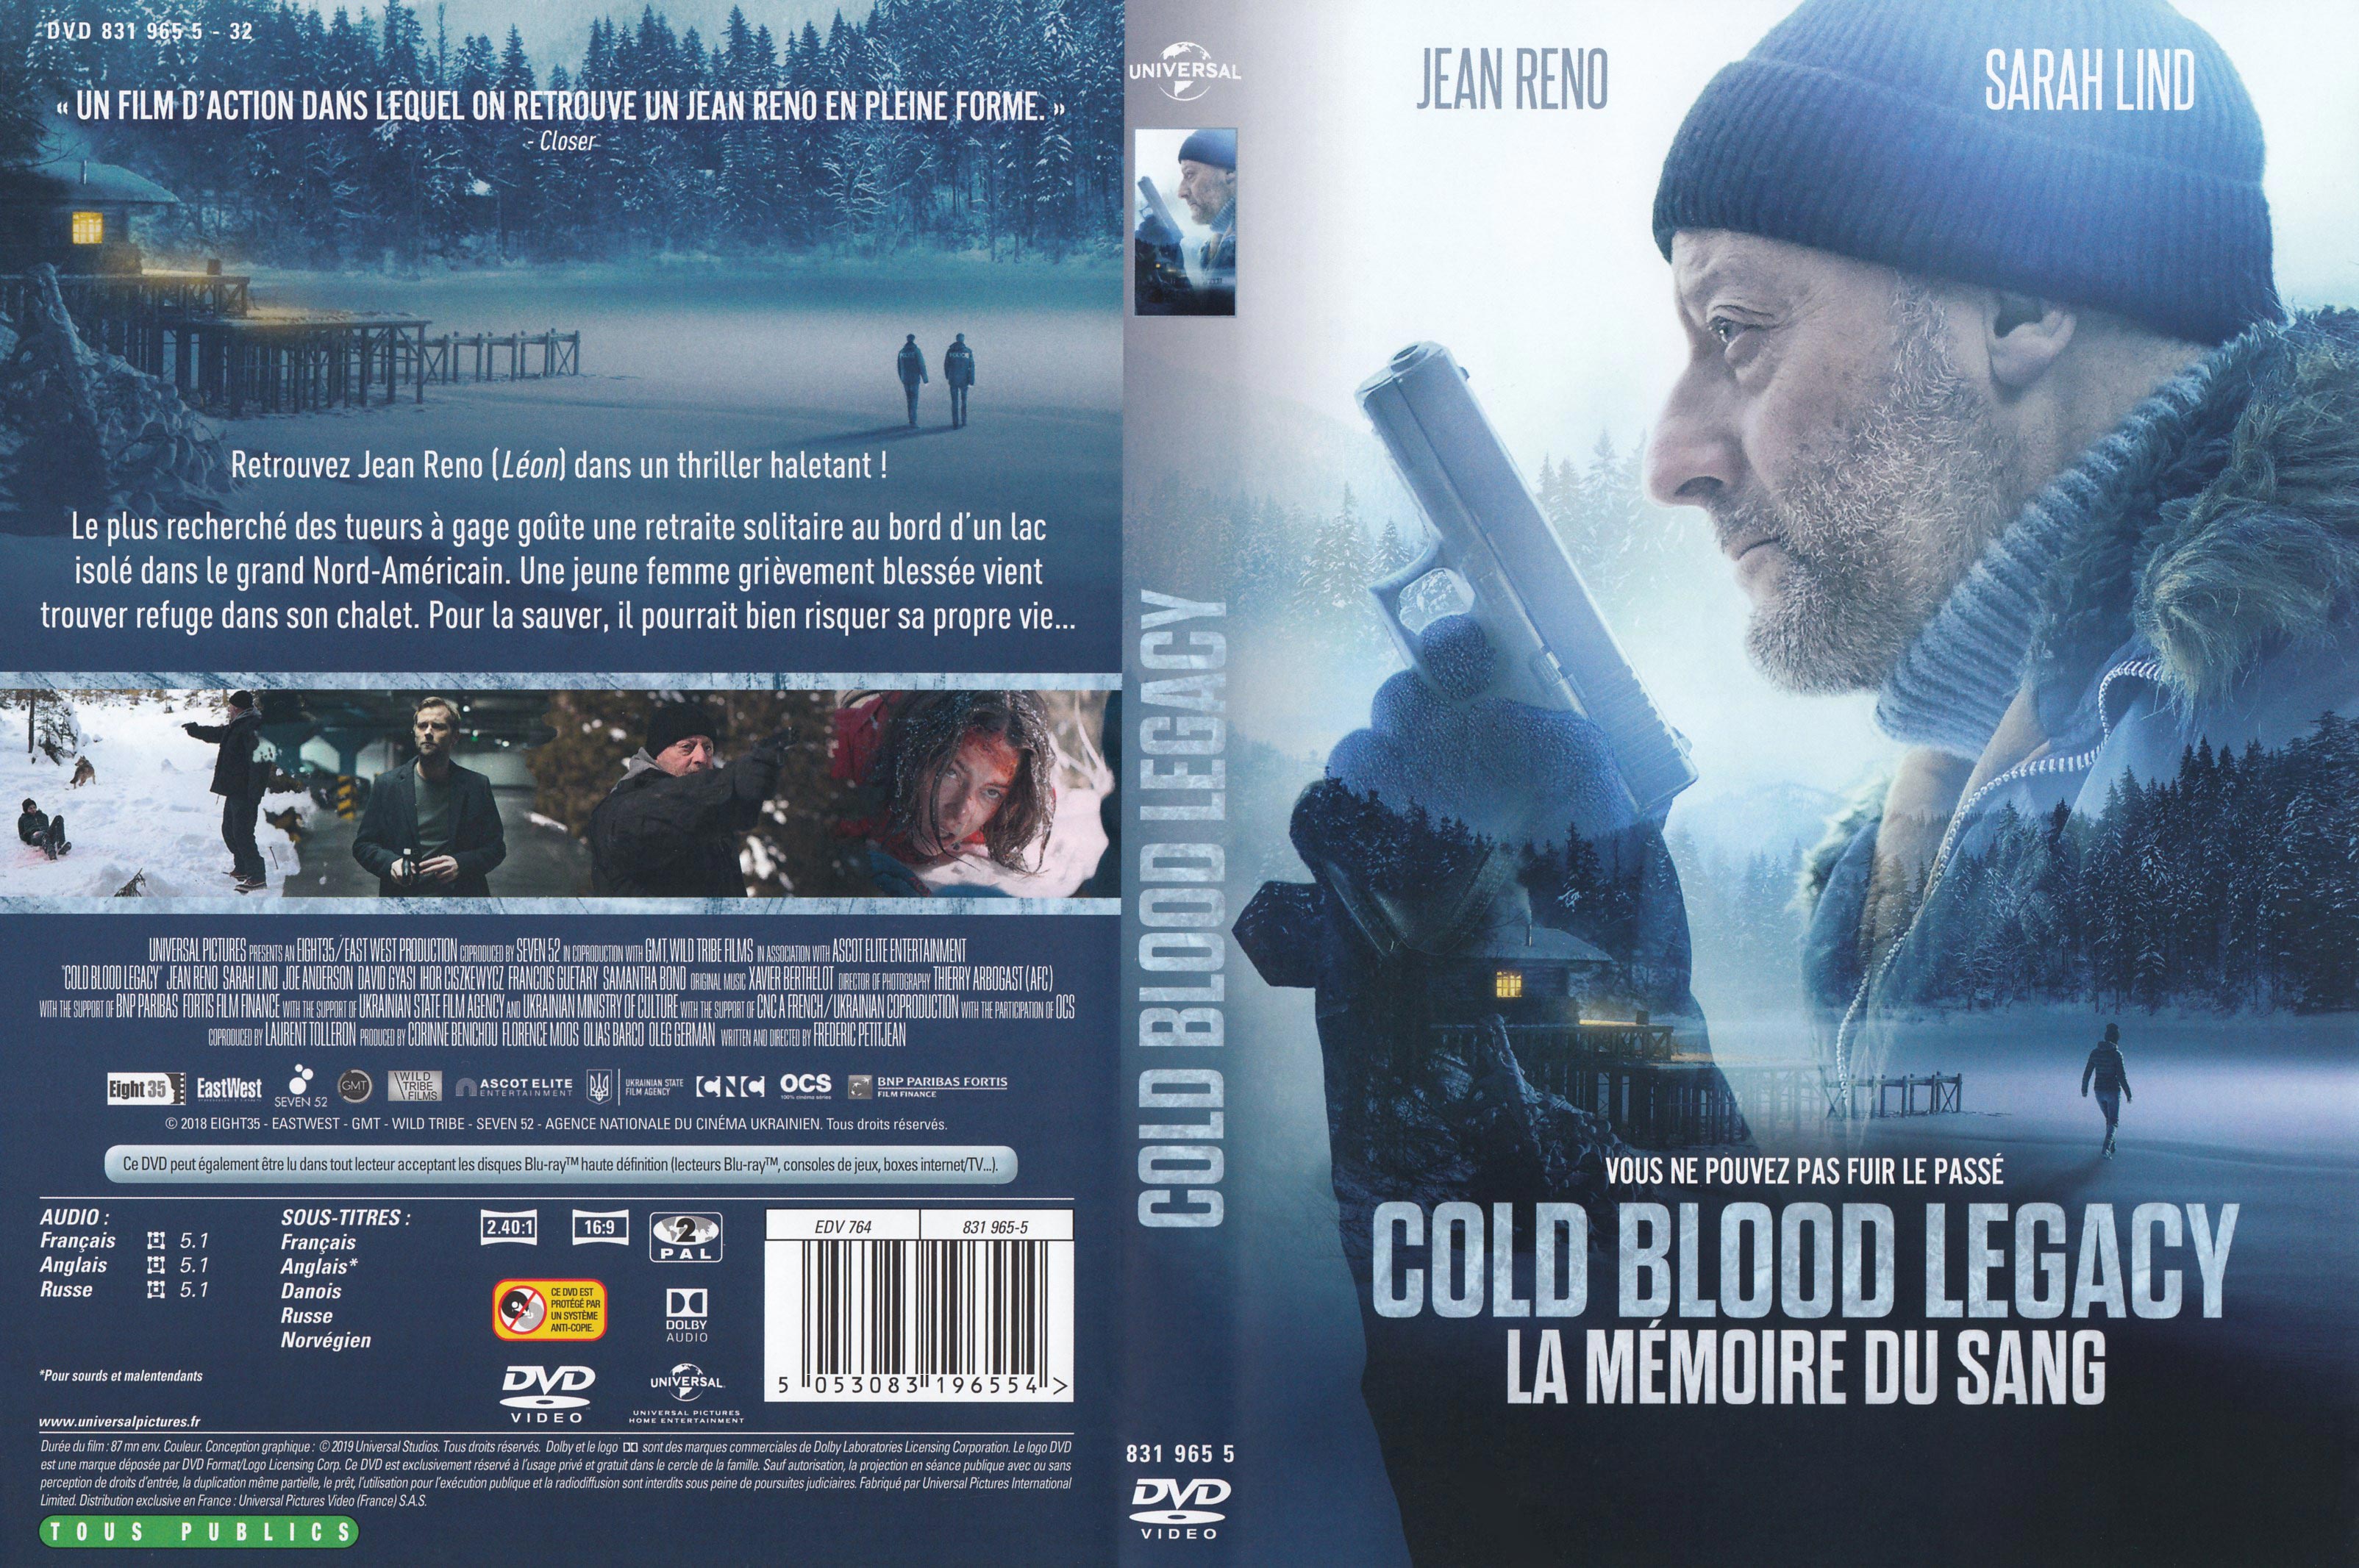 Jaquette DVD Cold blood legacy